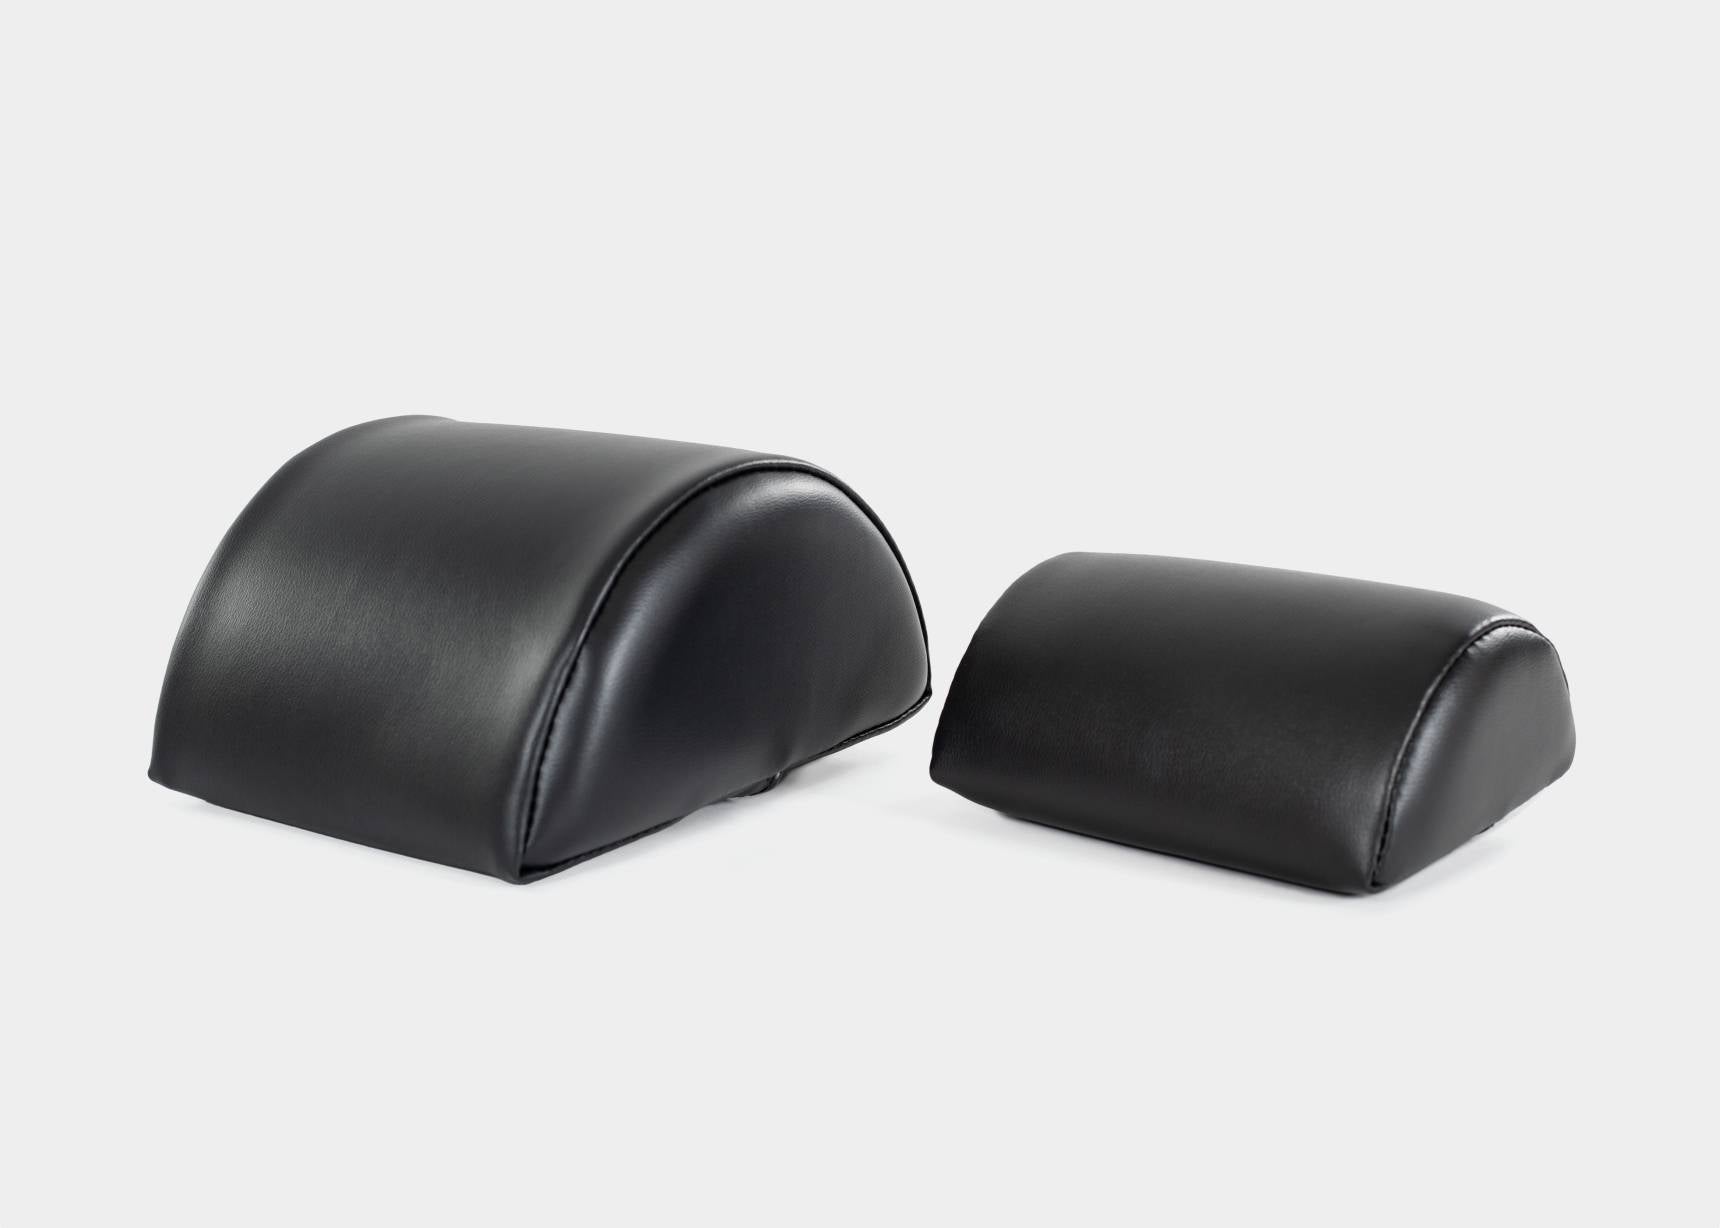 Black half-cylinder cushions for support and alignment.